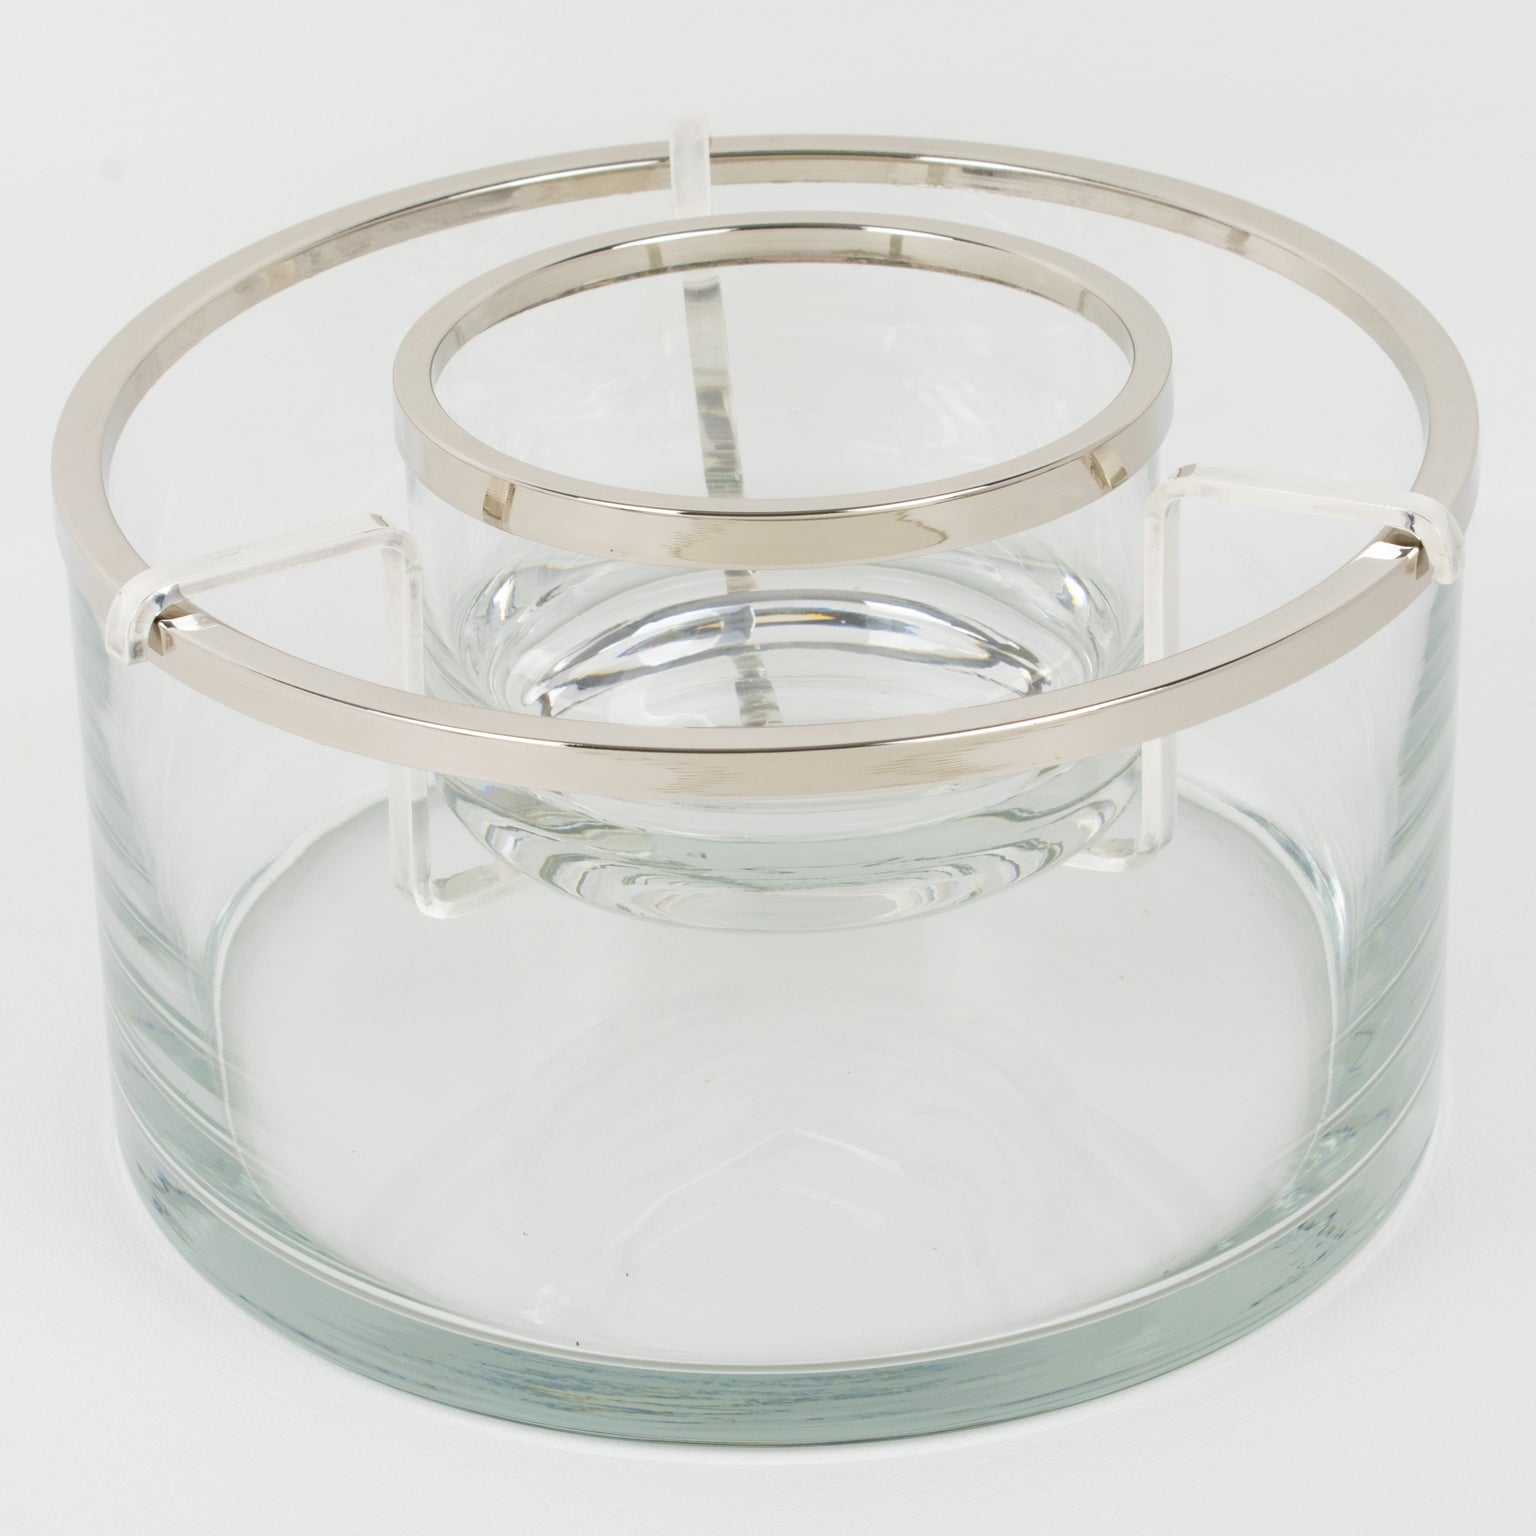 Stylish modernist Mid-Century silver plate and crystal caviar serving bowl, dish, or chiller designed by French silversmith St Hilaire for its Produx line in the 1970s. Minimalist chic design with a streamlined rounded shape, featuring a large